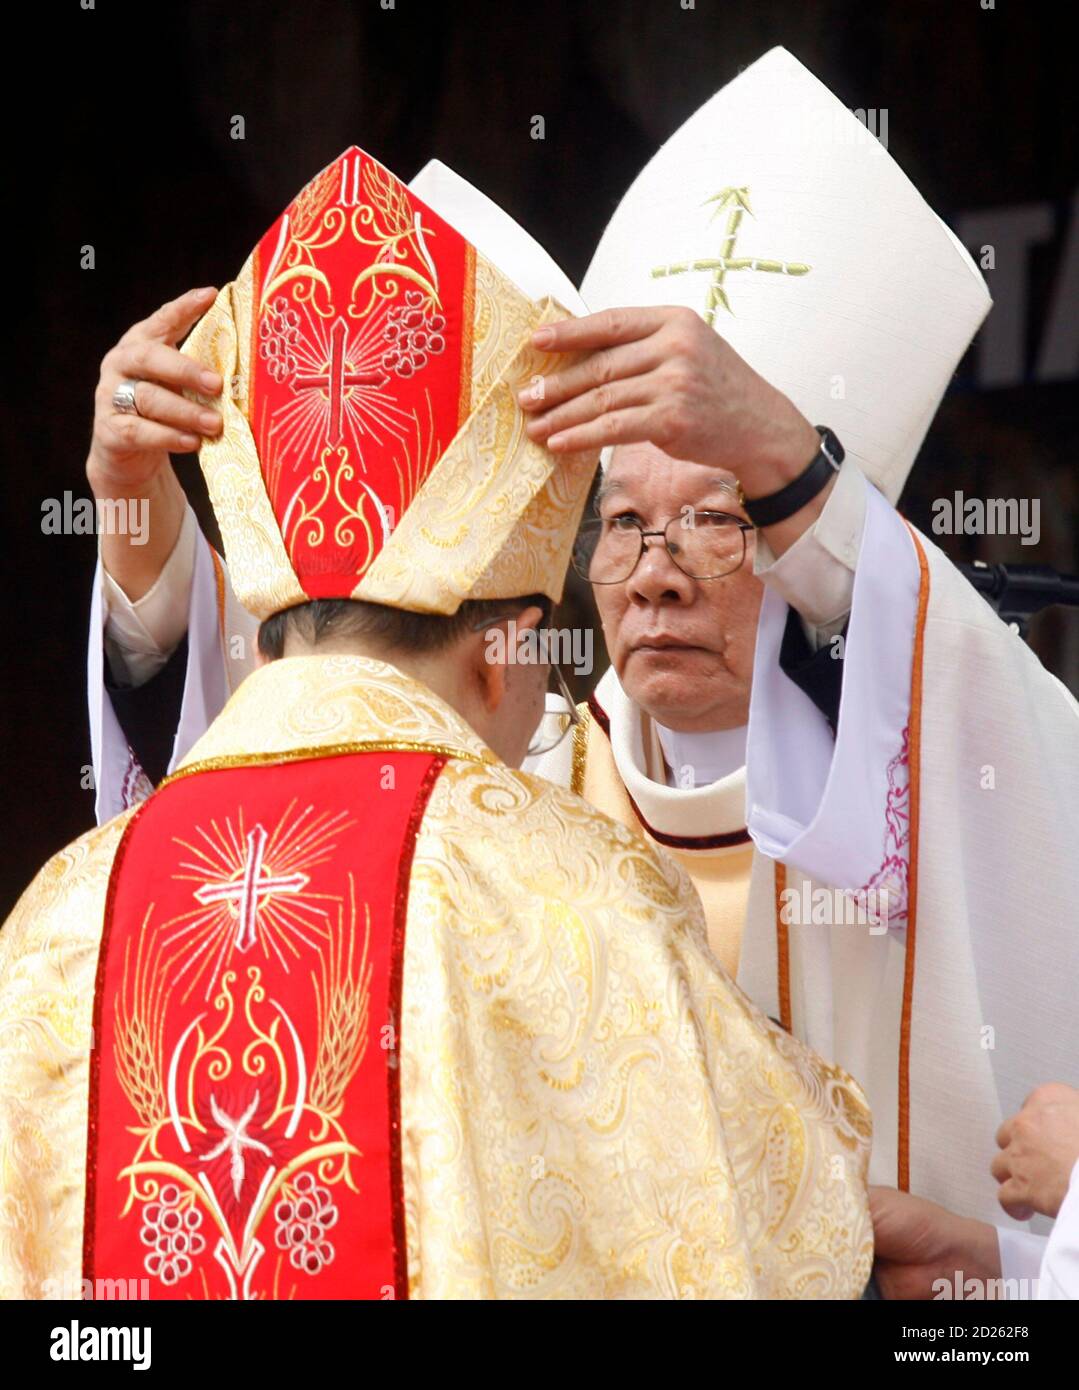 New Hung Hoa diocese's Auxiliary Bishop John Mary Vu Tat (L) receives the bishop's  hat, also know as a Miter, from Hung Hoa Bishop Antoine Vu Huy Chuong  during his consecration ceremony